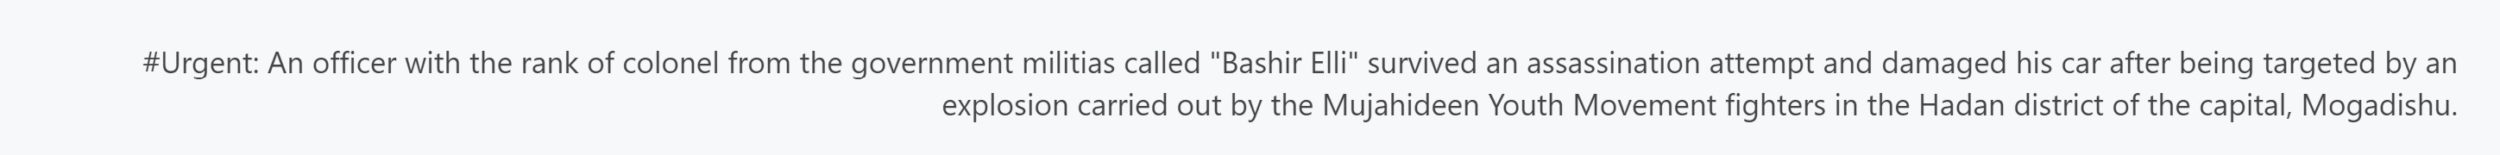 (Claim) al-Shabaab: A Somalian Army Colonel "Bashir Elli" Survived an Assassination Attempt by an IED that Damaged his Vehicle in Hadan District, Mogadishu, Somalia - 11 April 2022